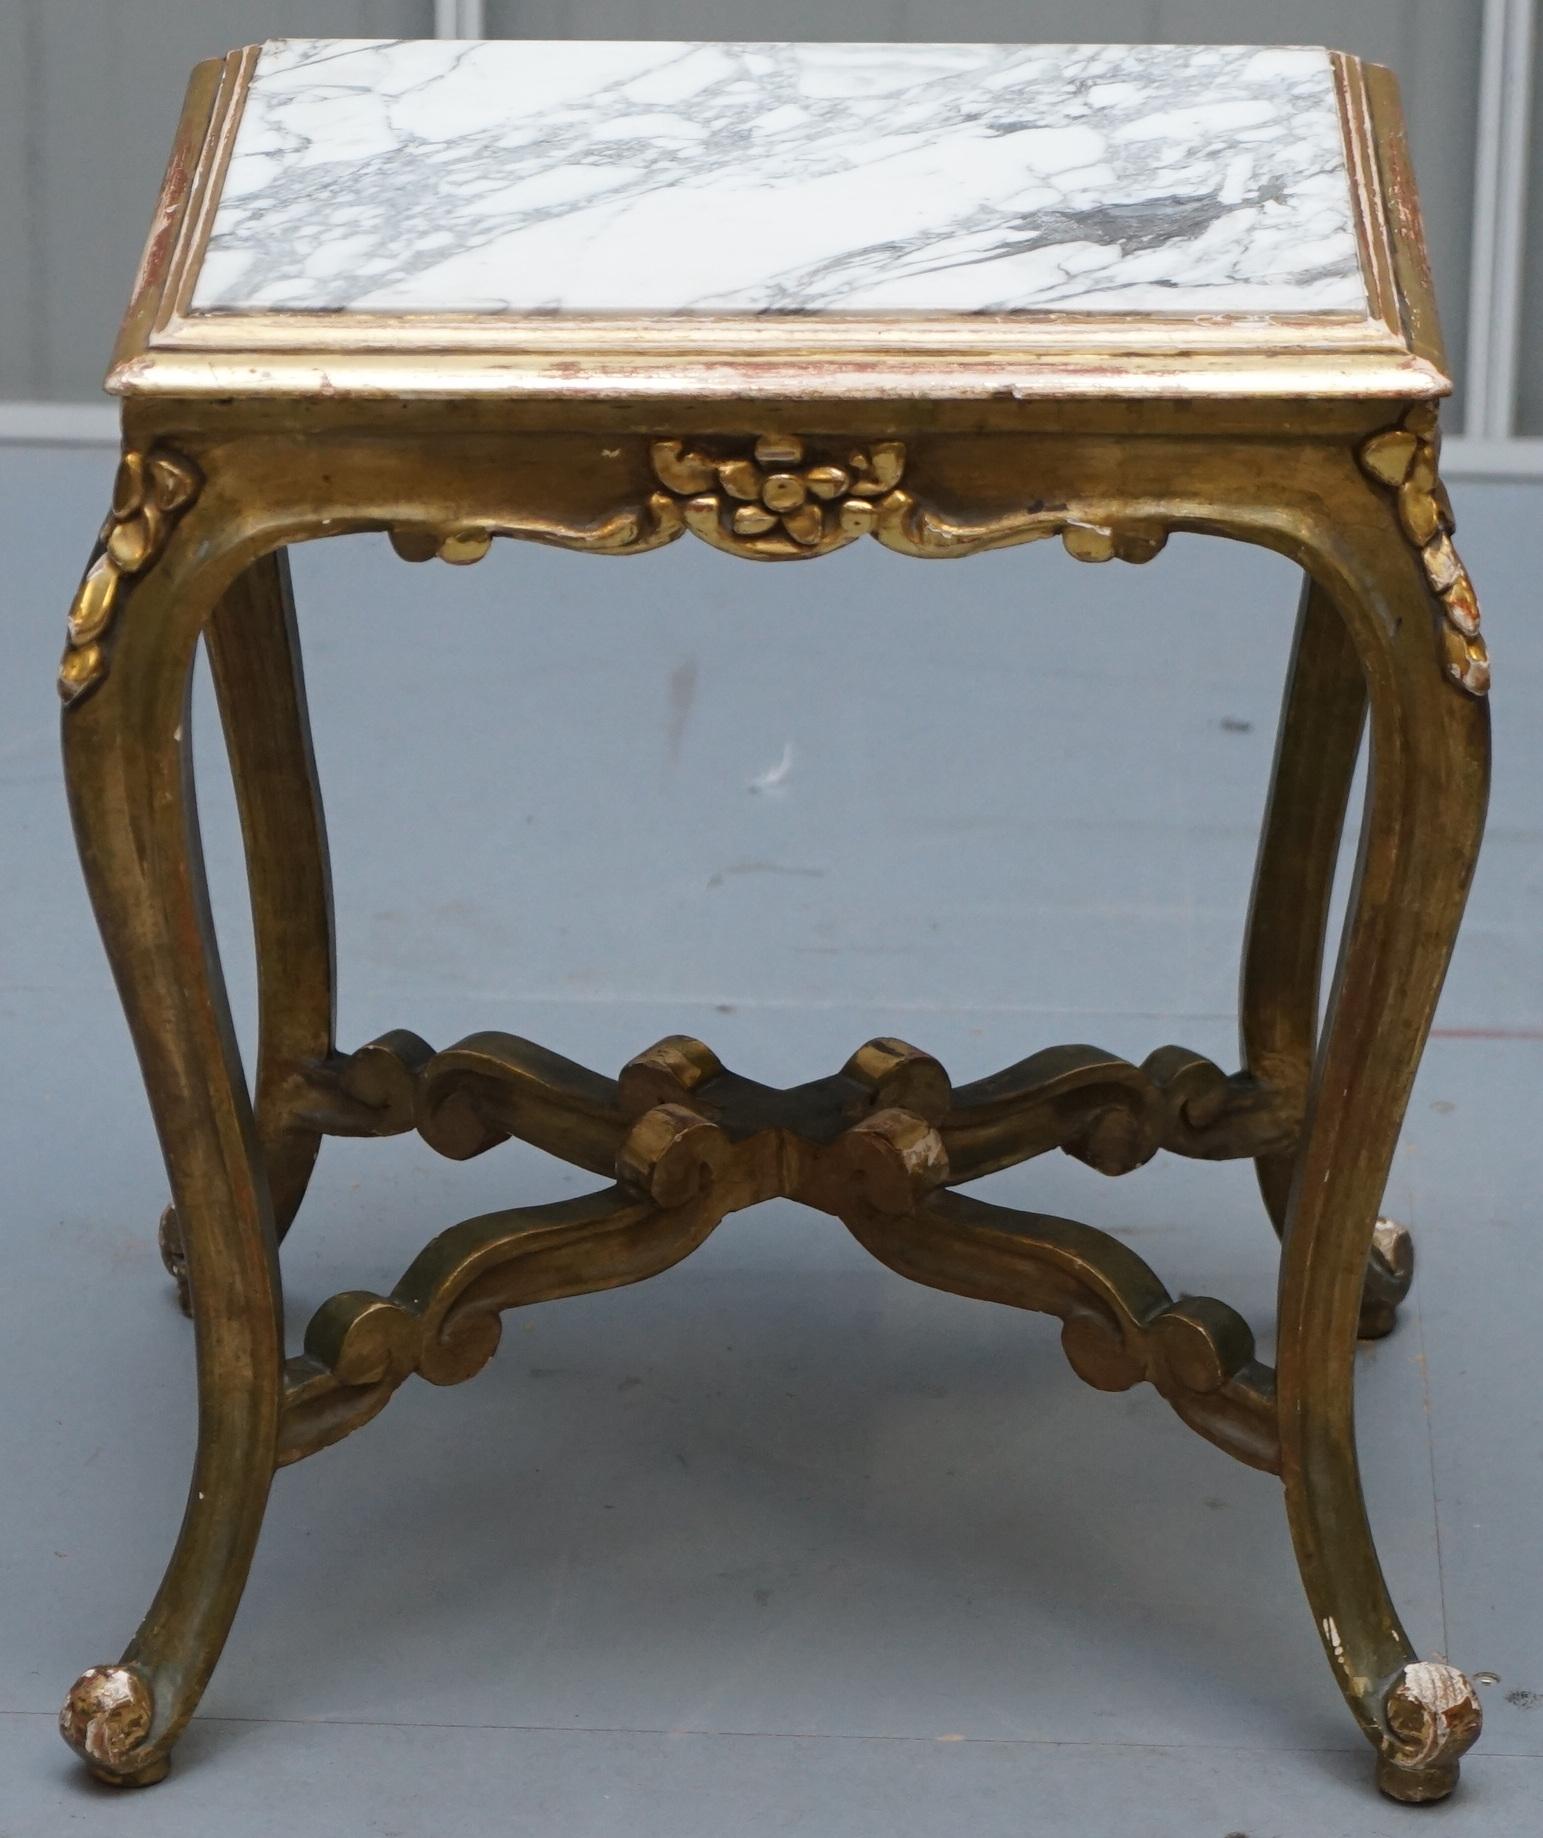 Hand-Crafted Pair of French circa 1860 Napoleon III Gold Giltwood Marble Topped Side Tables For Sale